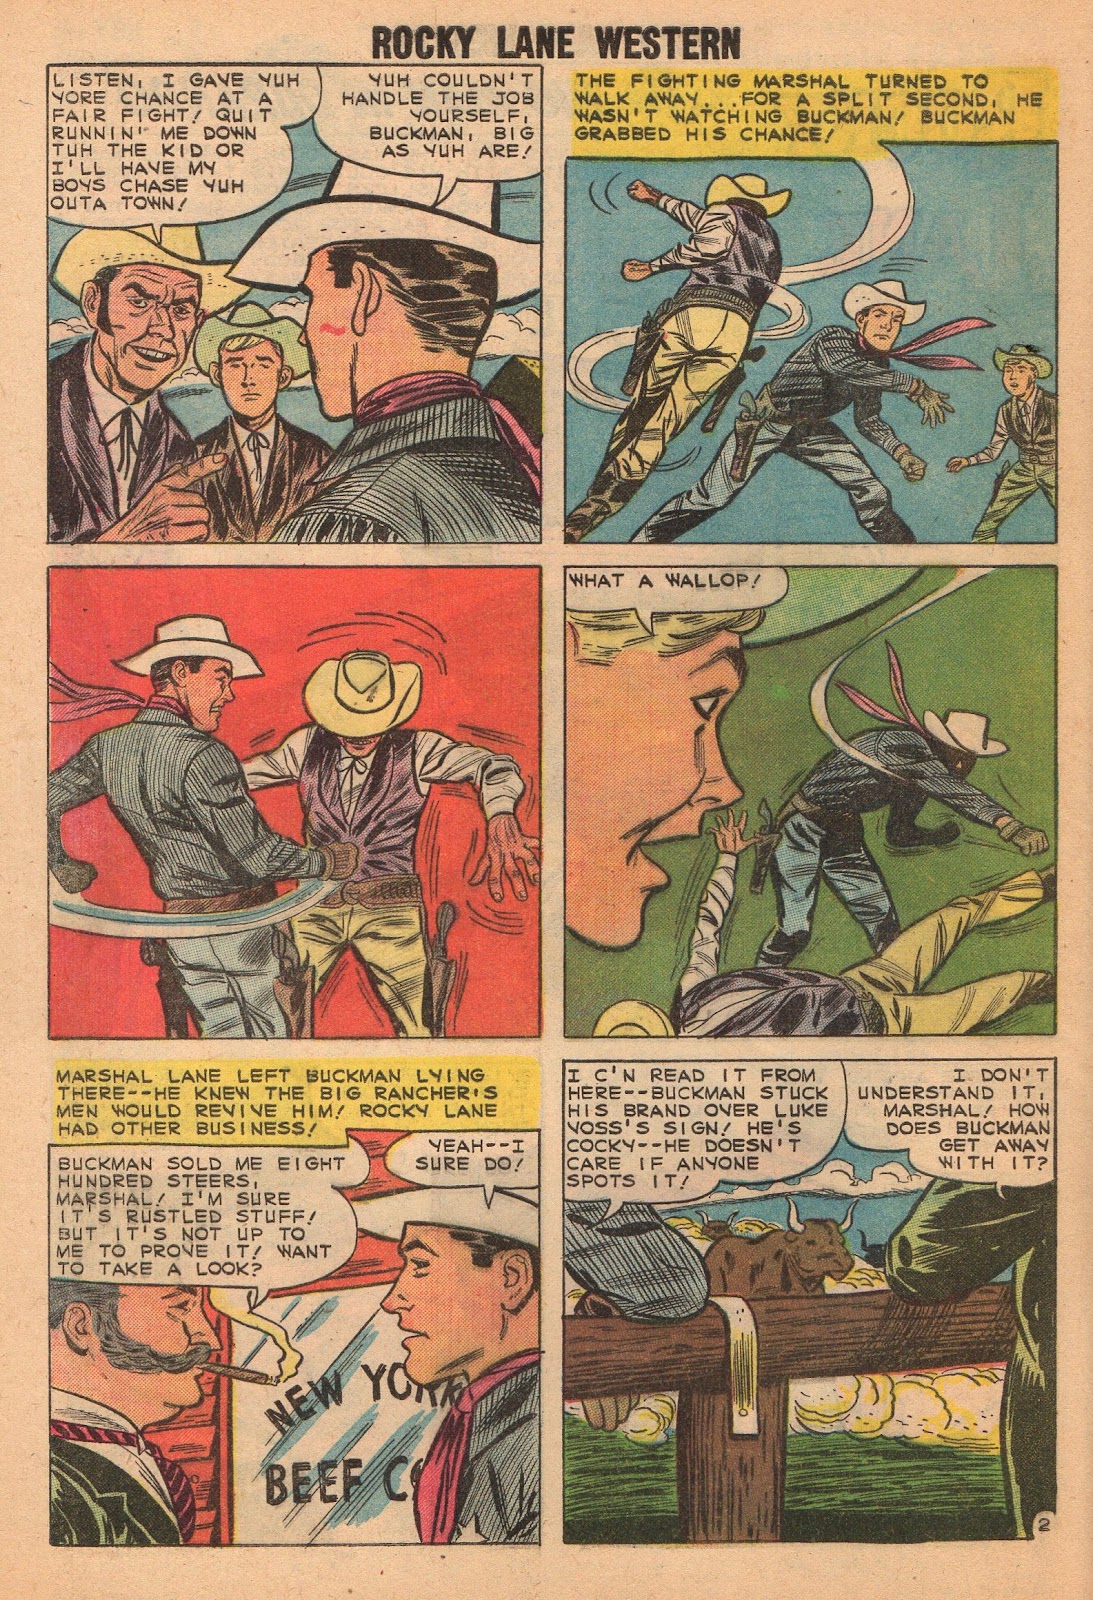 Rocky Lane Western (1954) issue 86 - Page 4